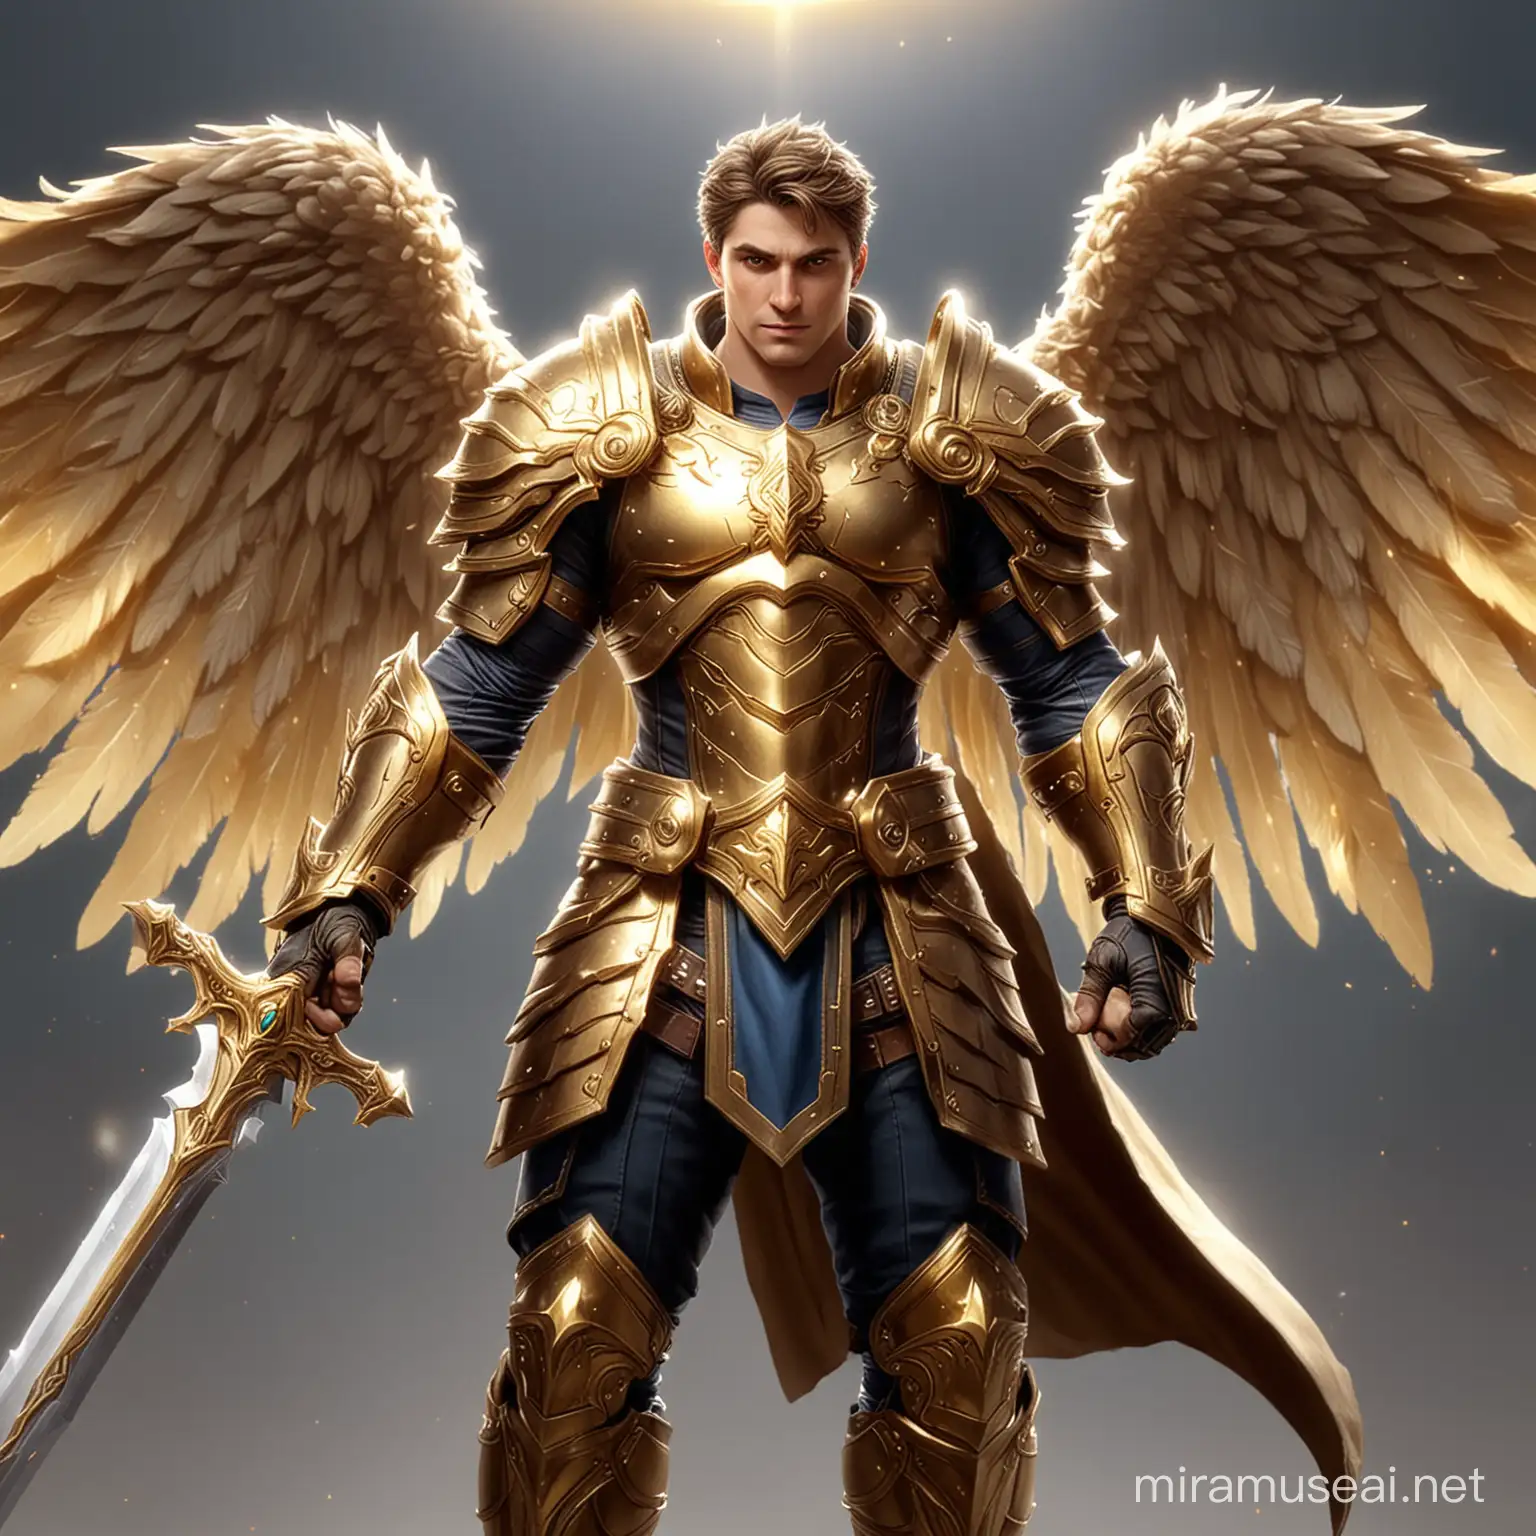 GoldenWinged Garen in Holy Paladin Armor with Ethereal Aura and Sword